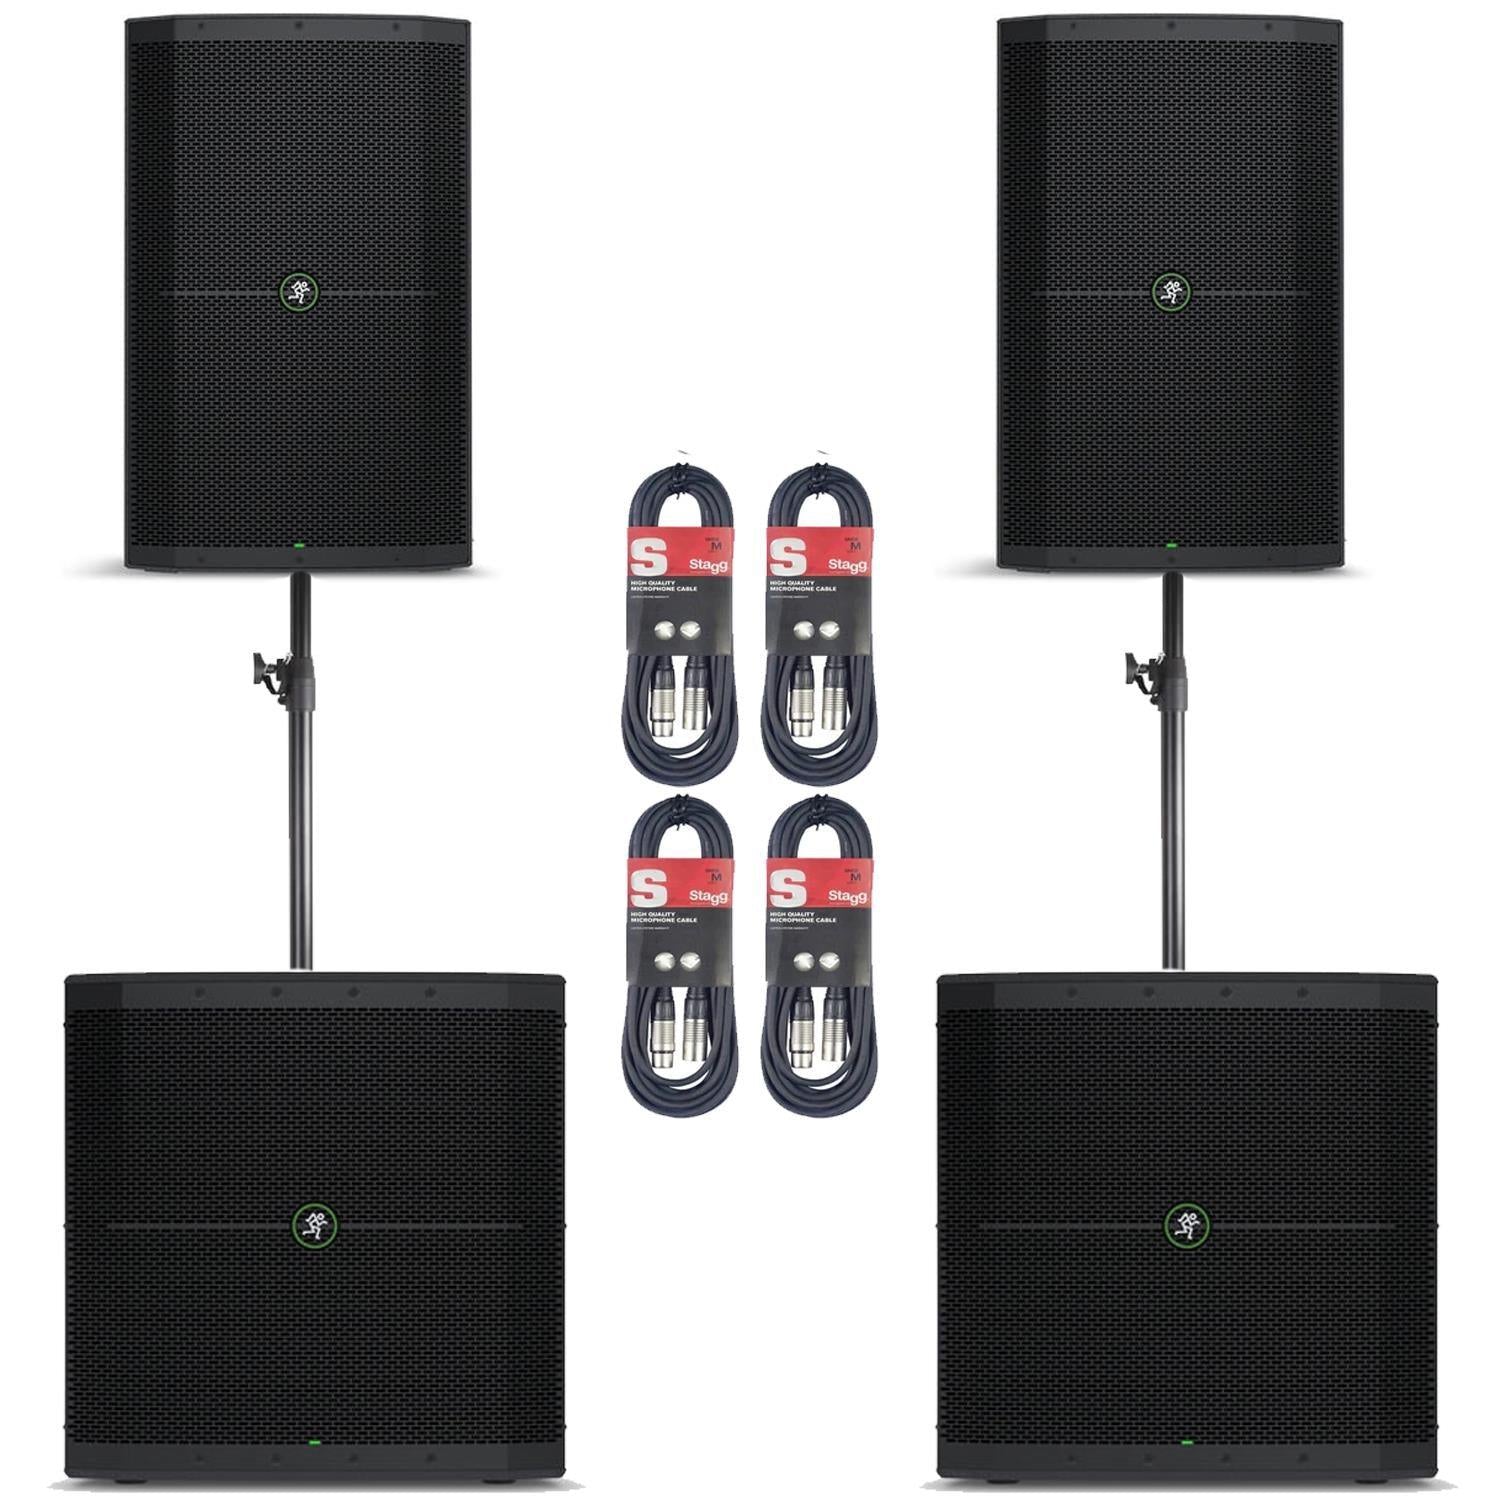 Mackie Thump 212 Speakers & Thump 115 Subwoofer Package